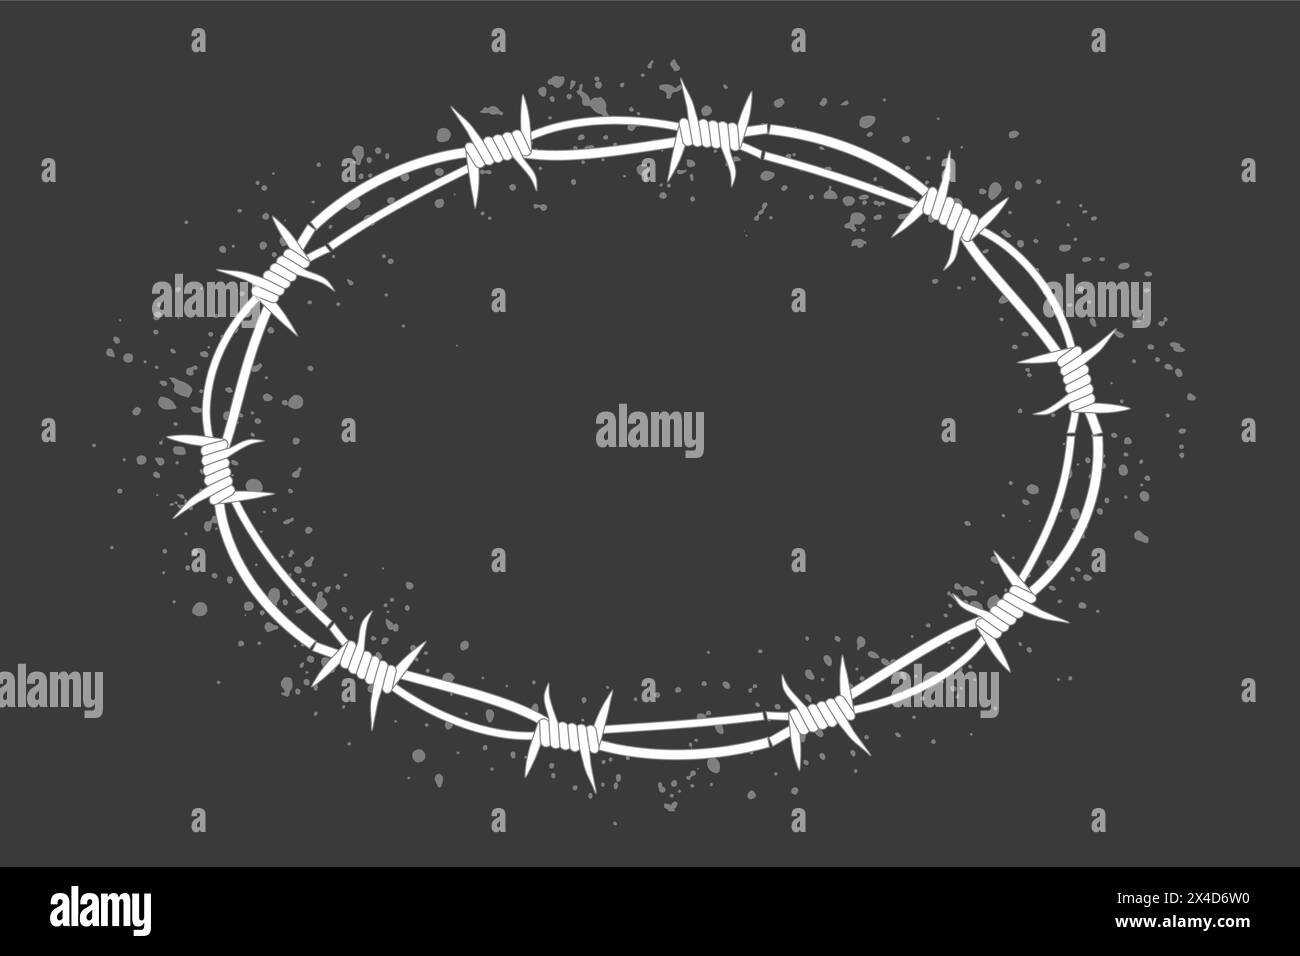 Barbed wire twisted ring y2k, round border tattoo, gothic textured steel frame, spiky oval barrier, silhouette isolated on dark background. Vector illustration Stock Vector